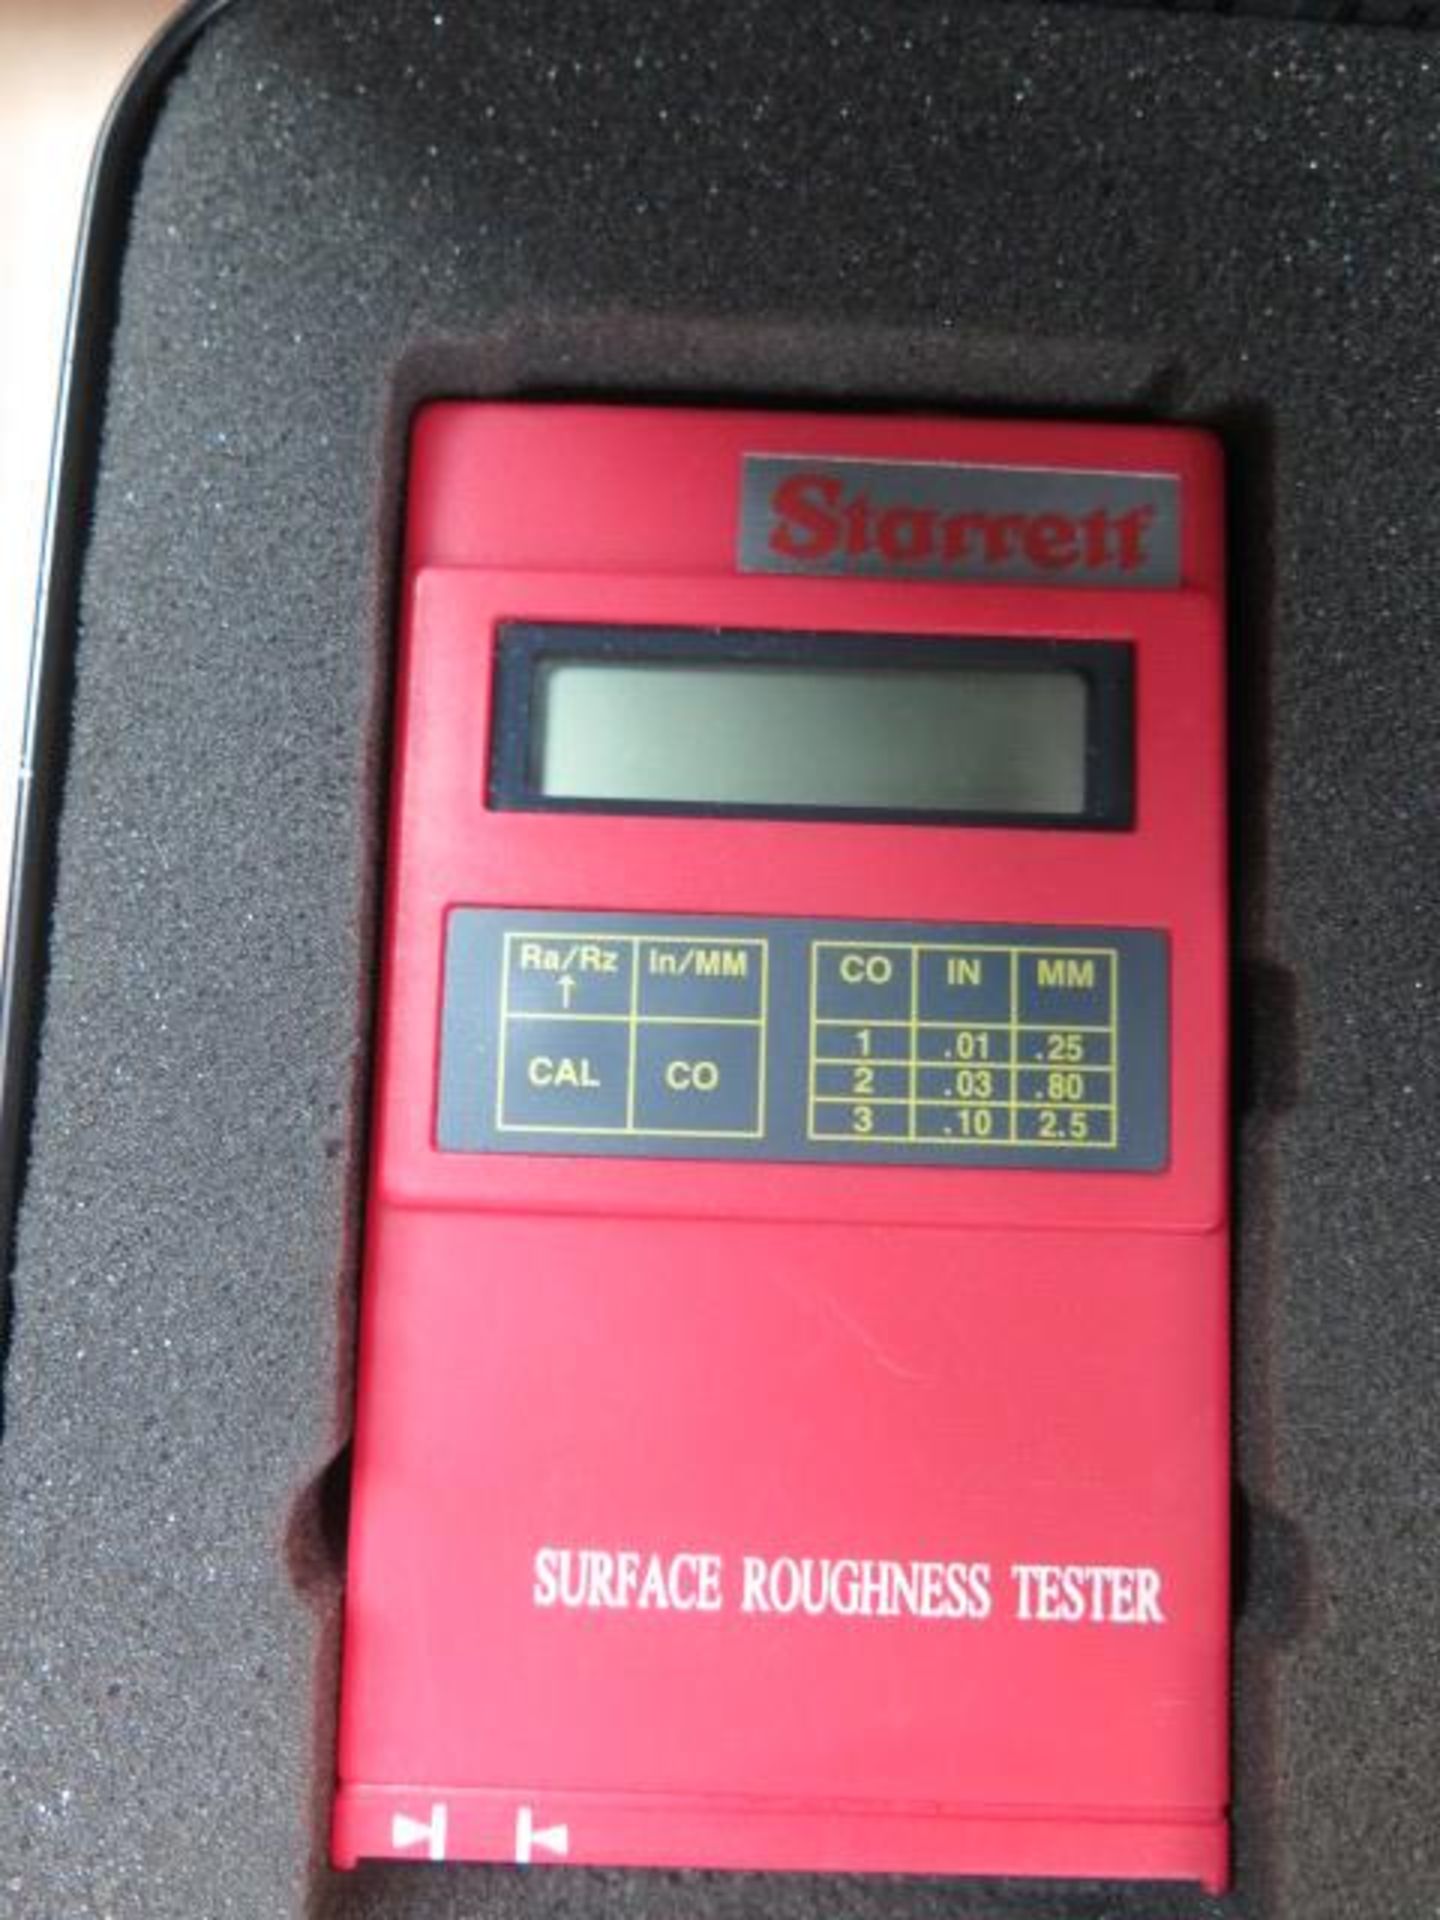 Starrett no. 3800 Digital Surface Roughness Gage (SOLD AS-IS - NO WARRANTY) - Image 4 of 4